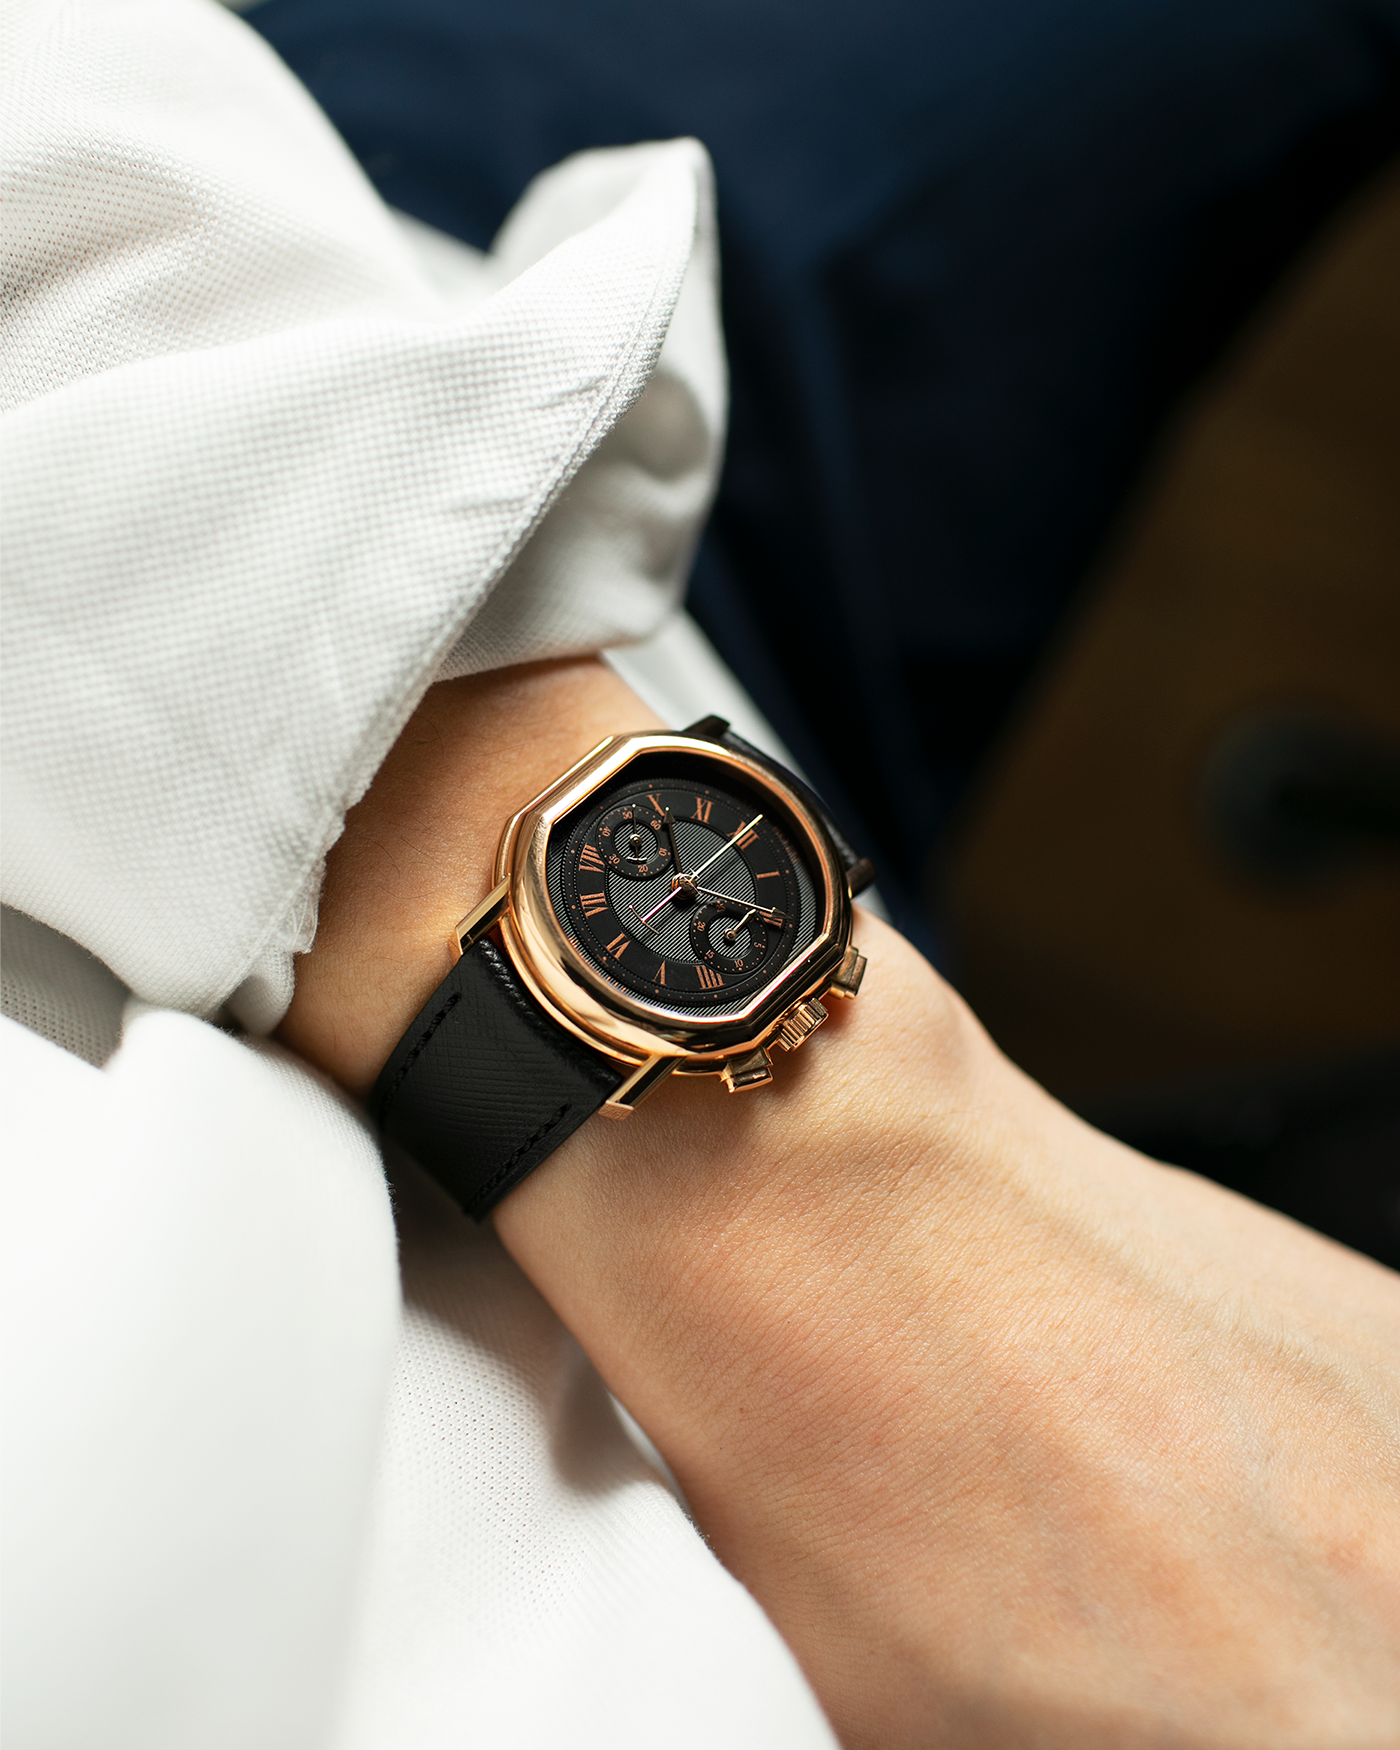 Brand: Daniel Roth Year: 1990’s Model: 2147 Material: 18k Rose Gold Movement: Lemania 2320 Case Diameter: 35mm X 38mm Strap: Molequin Black Textured Calf Leather and Gold Plated Tang Buckle